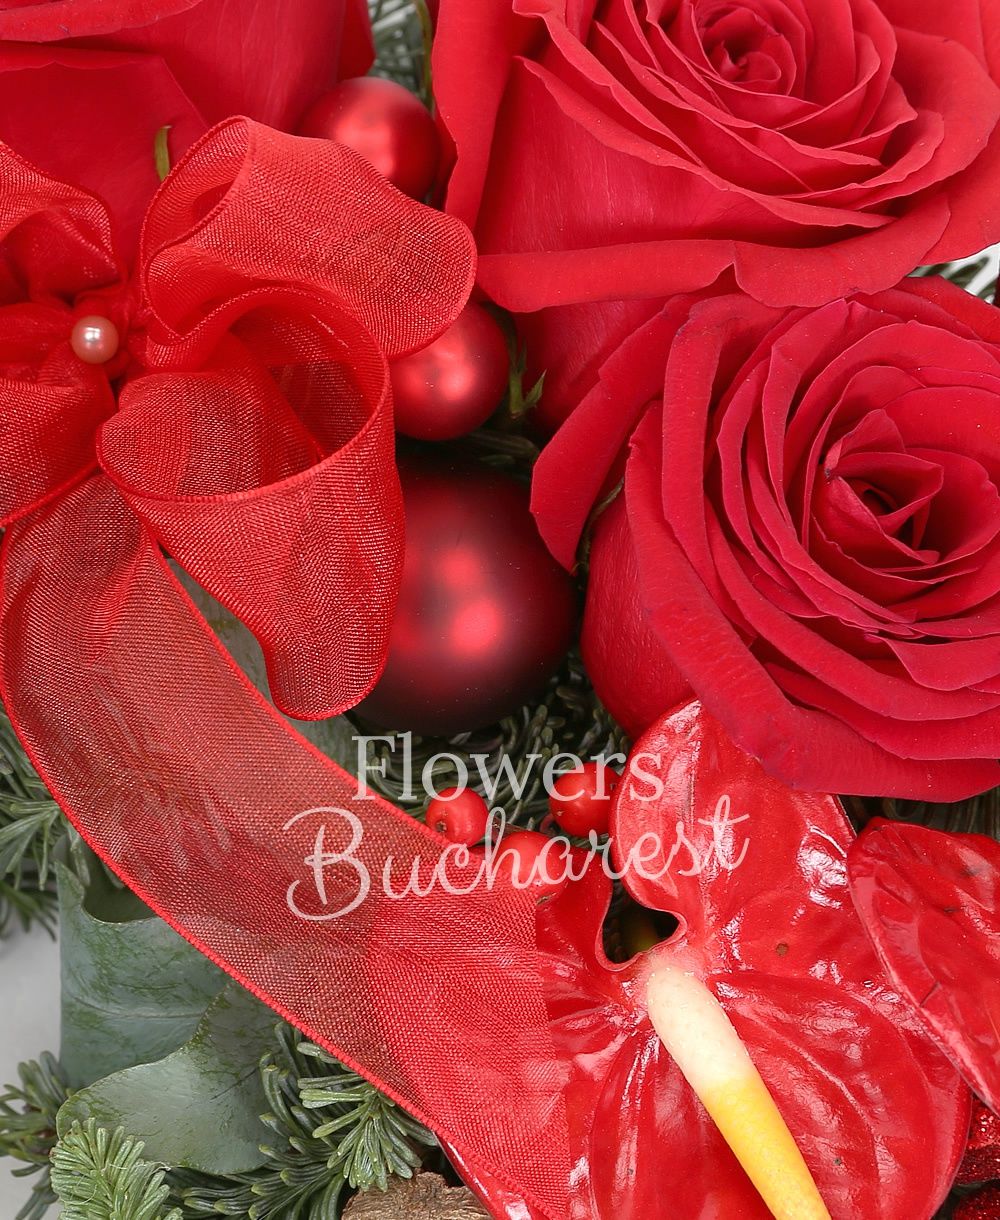 3 red roses, 4 anthurium, brunia, greenery, silver fir, christmas decorations